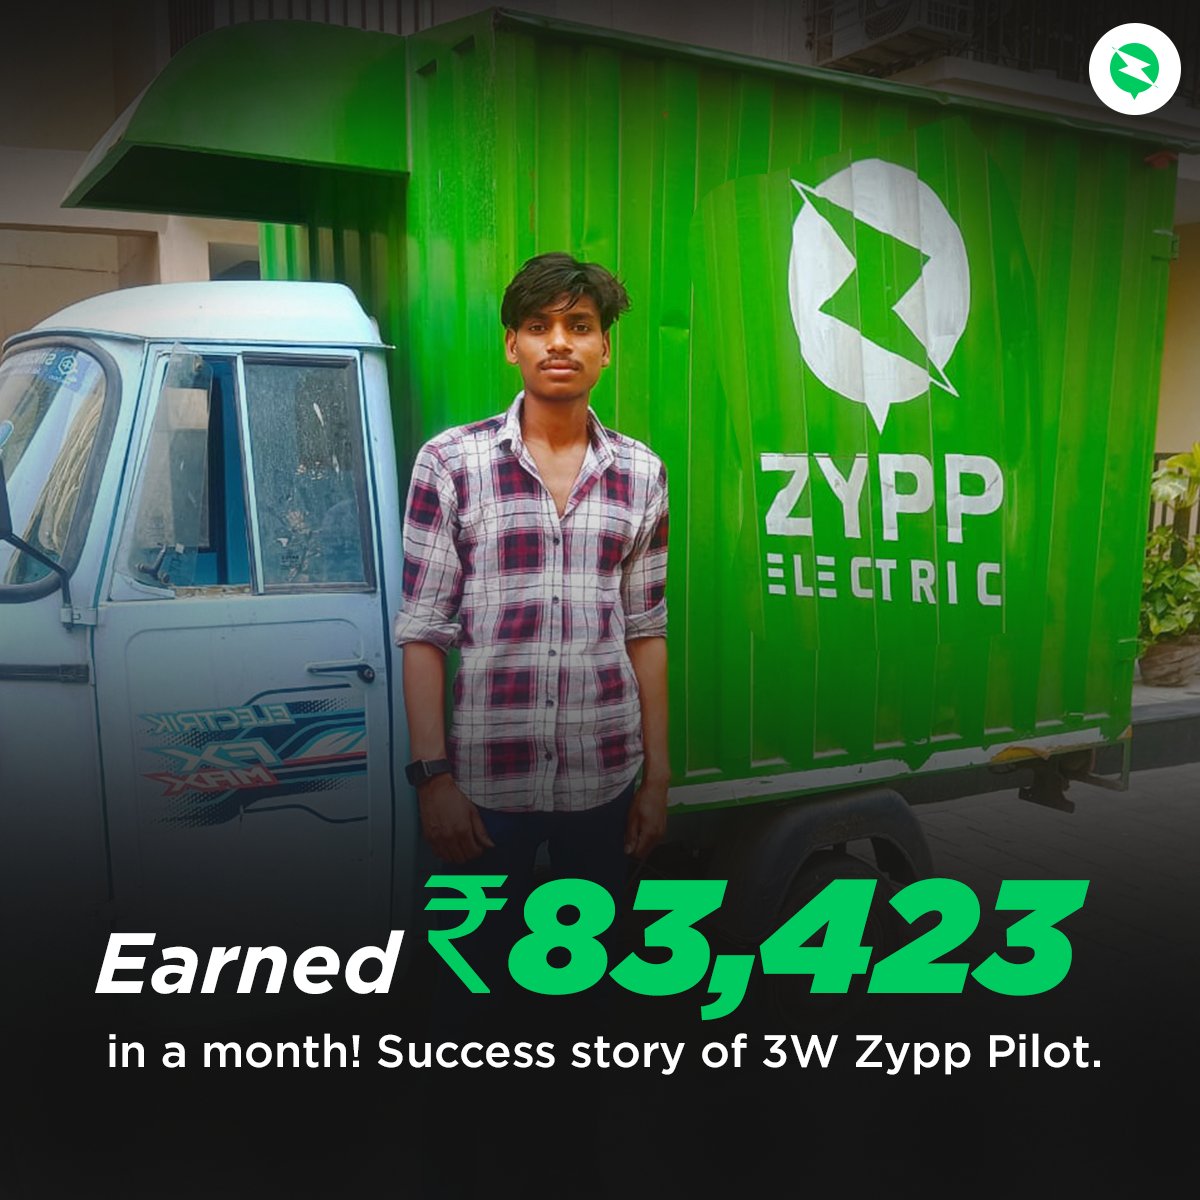 Who said, delivery partners can’t earn respected income? Hanumantharya, an Electric 3-wheeler Zypp Pilot from Bengaluru earned ₹83,423 last month and expressed his happiness and secret sauce of earning this income. #zypppilot #zyppelectric #3wloader #pollution #riderearning